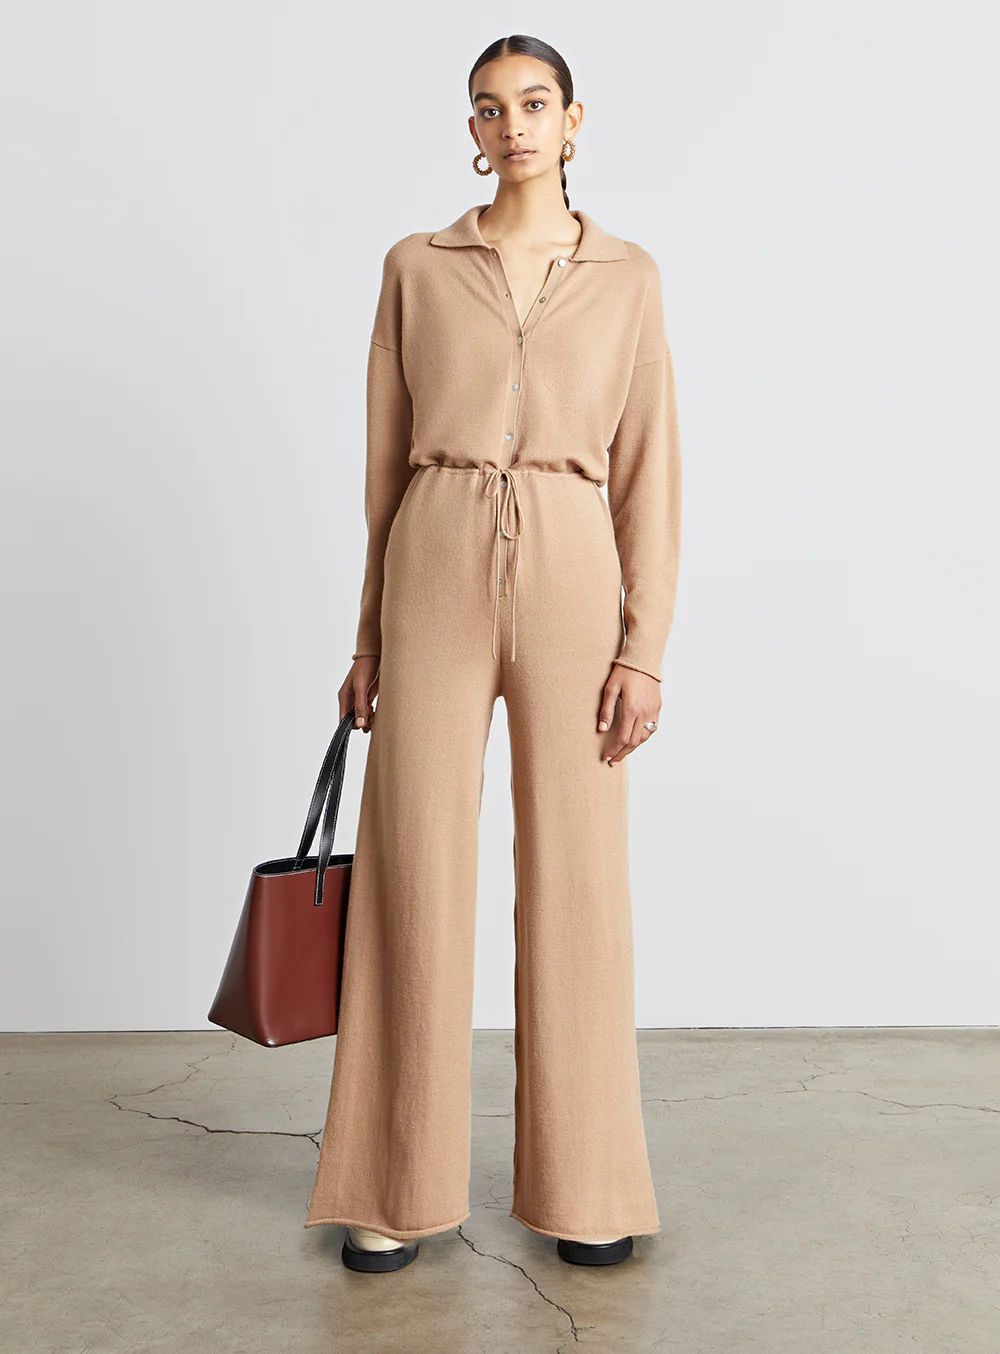 Demi Knit Jumpsuit | Who What Wear Collection